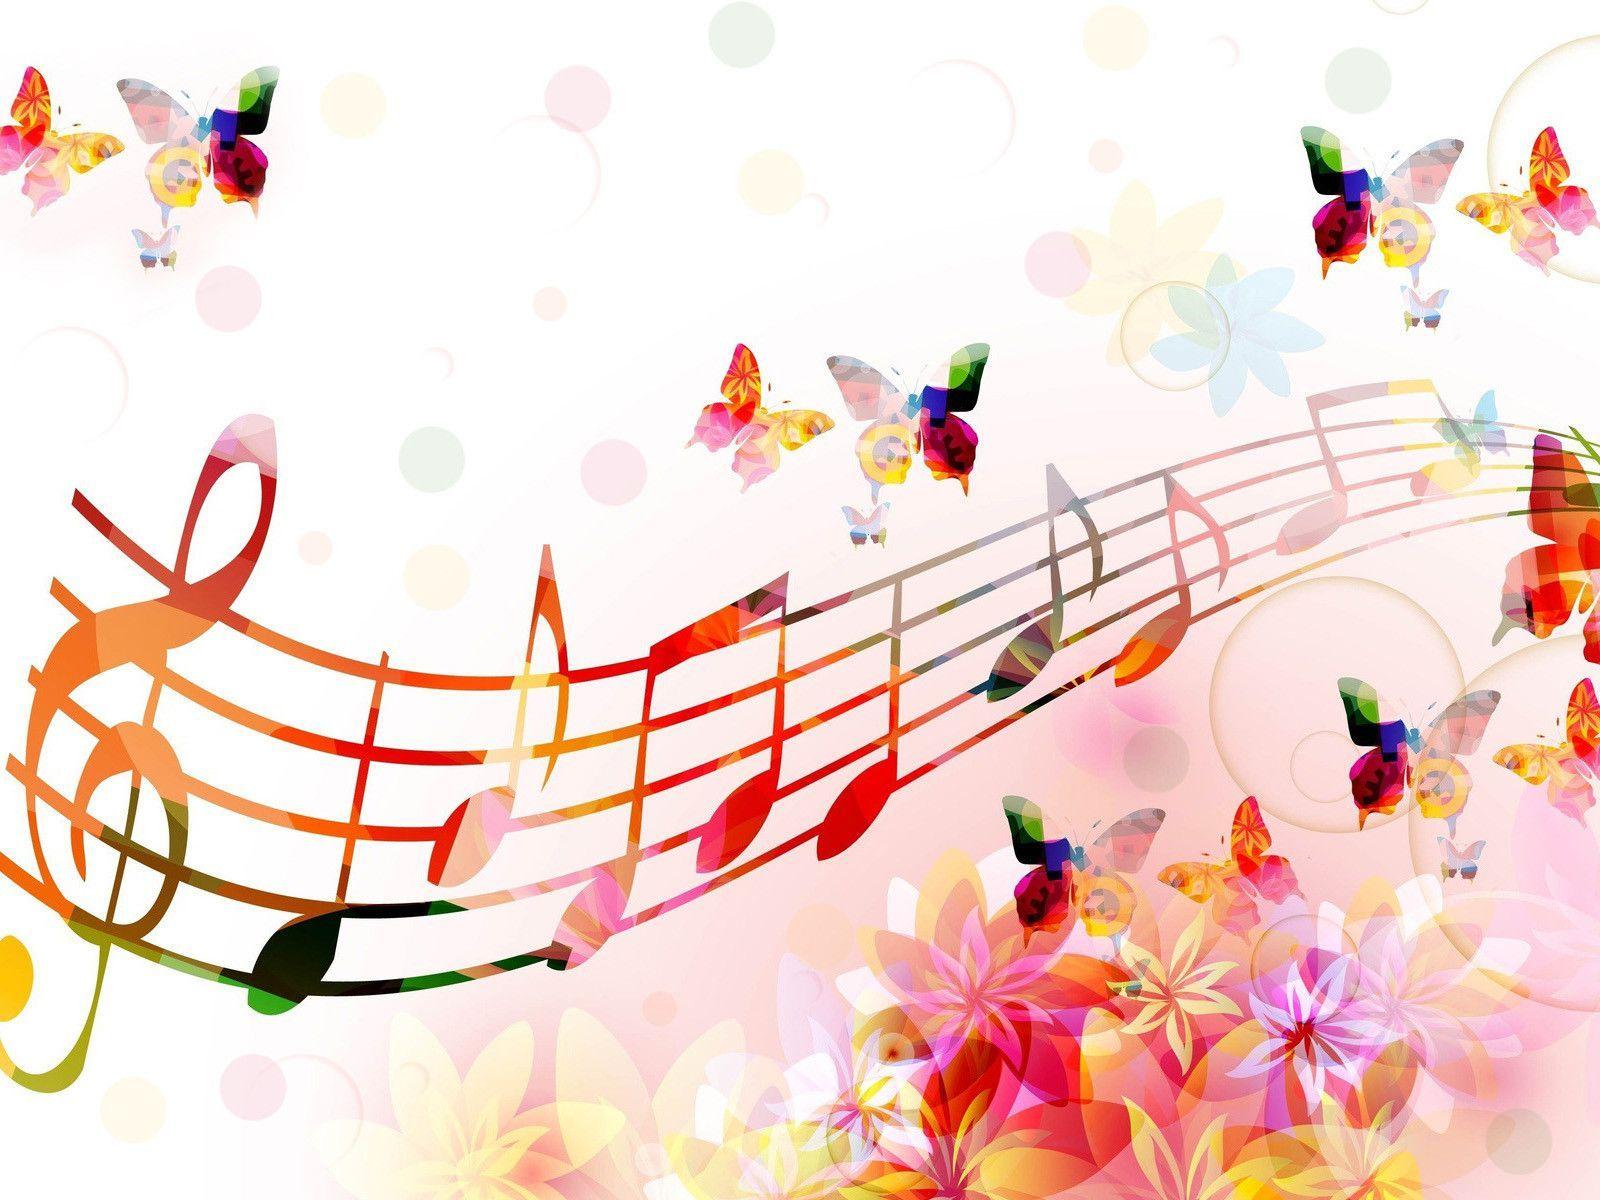 tumblr musicians for themes Wallpaper Backgrounds  Music  Cave